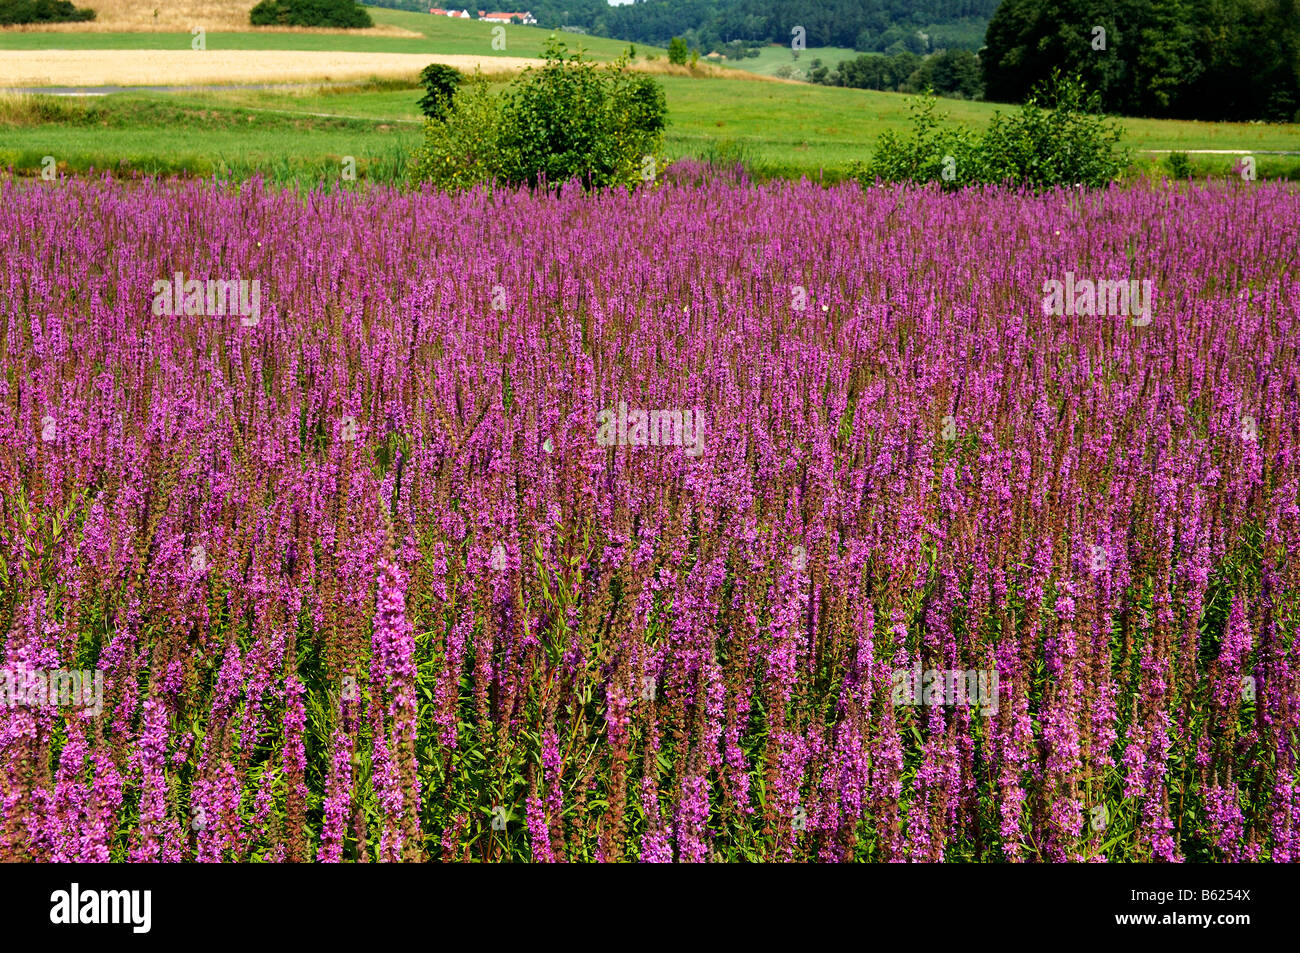 Purple-loosestrife (Lythrum salicaria) growing in a carp pond, Grossbellhofen, Middle Franconia, Bavaria, Germany, Europe Stock Photo